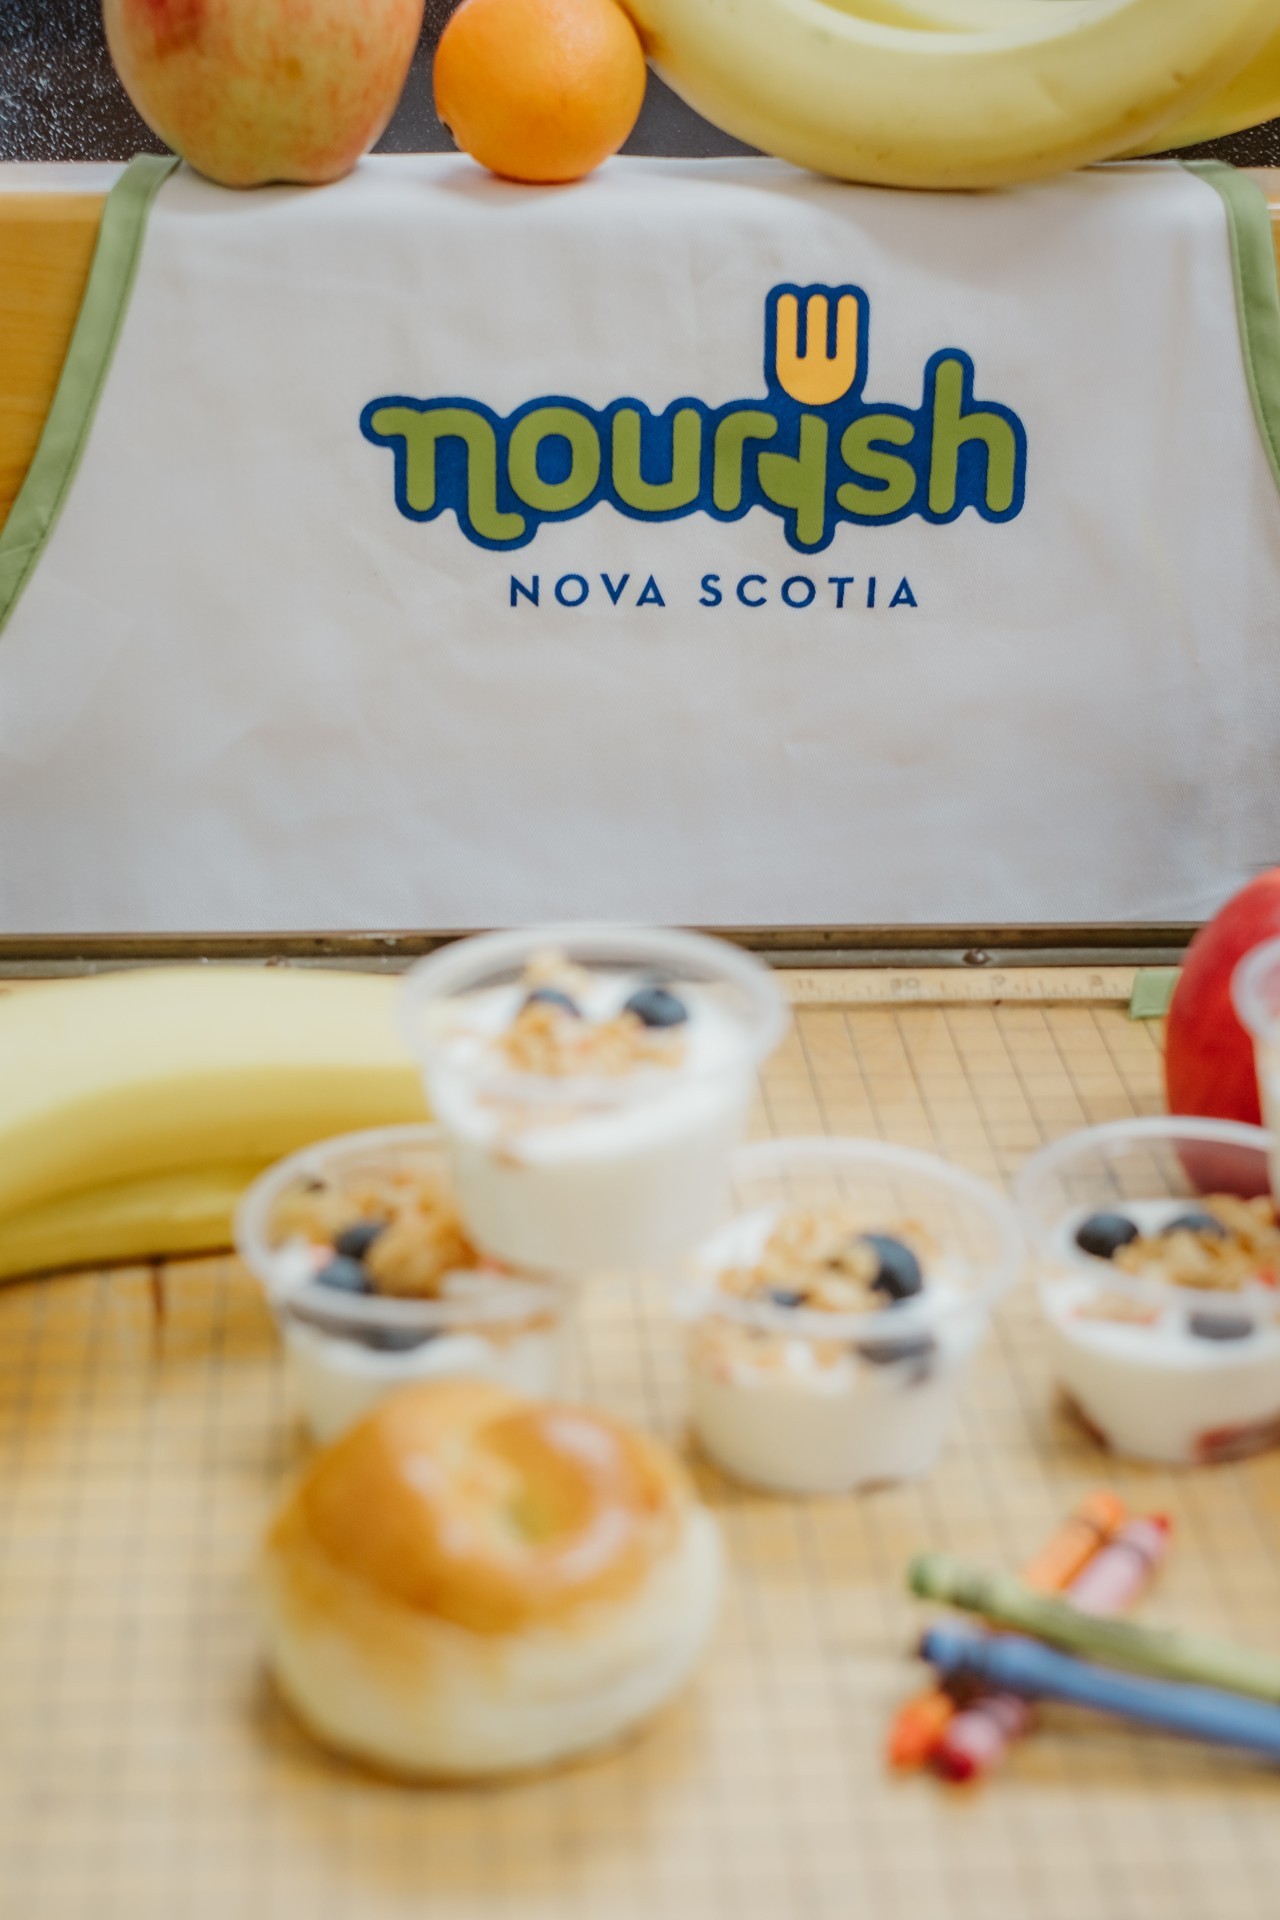 Nourish-branded apron sits behind an assortment of food items and crayons